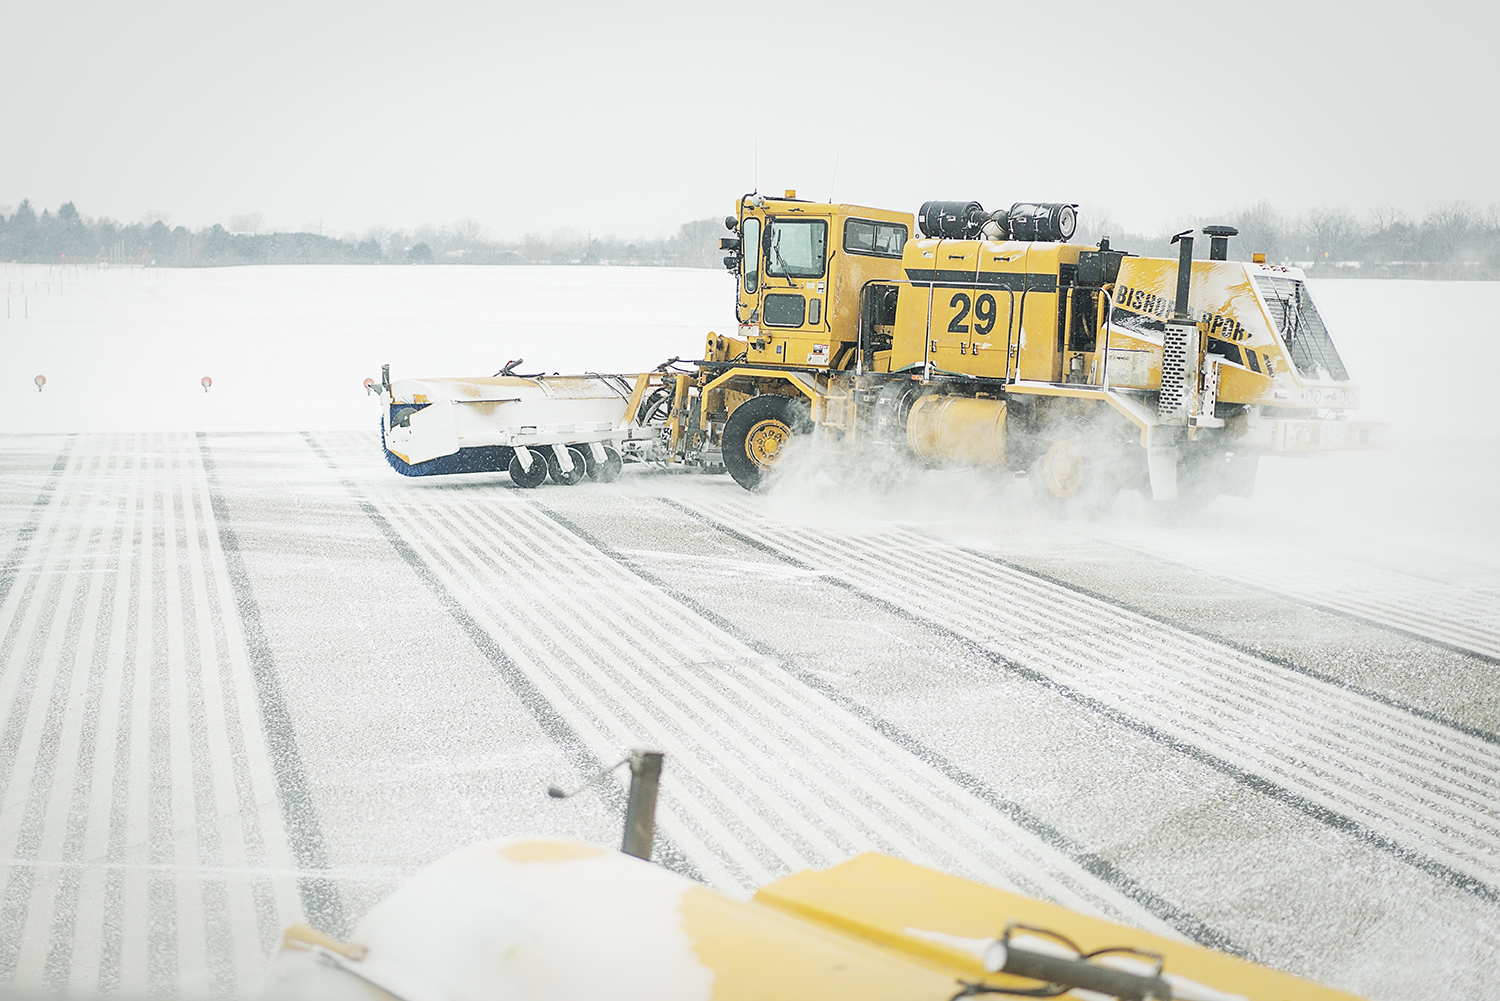 A broom truck, using massive brushes and a blower clears snow from the runway at Bishop International Airport.